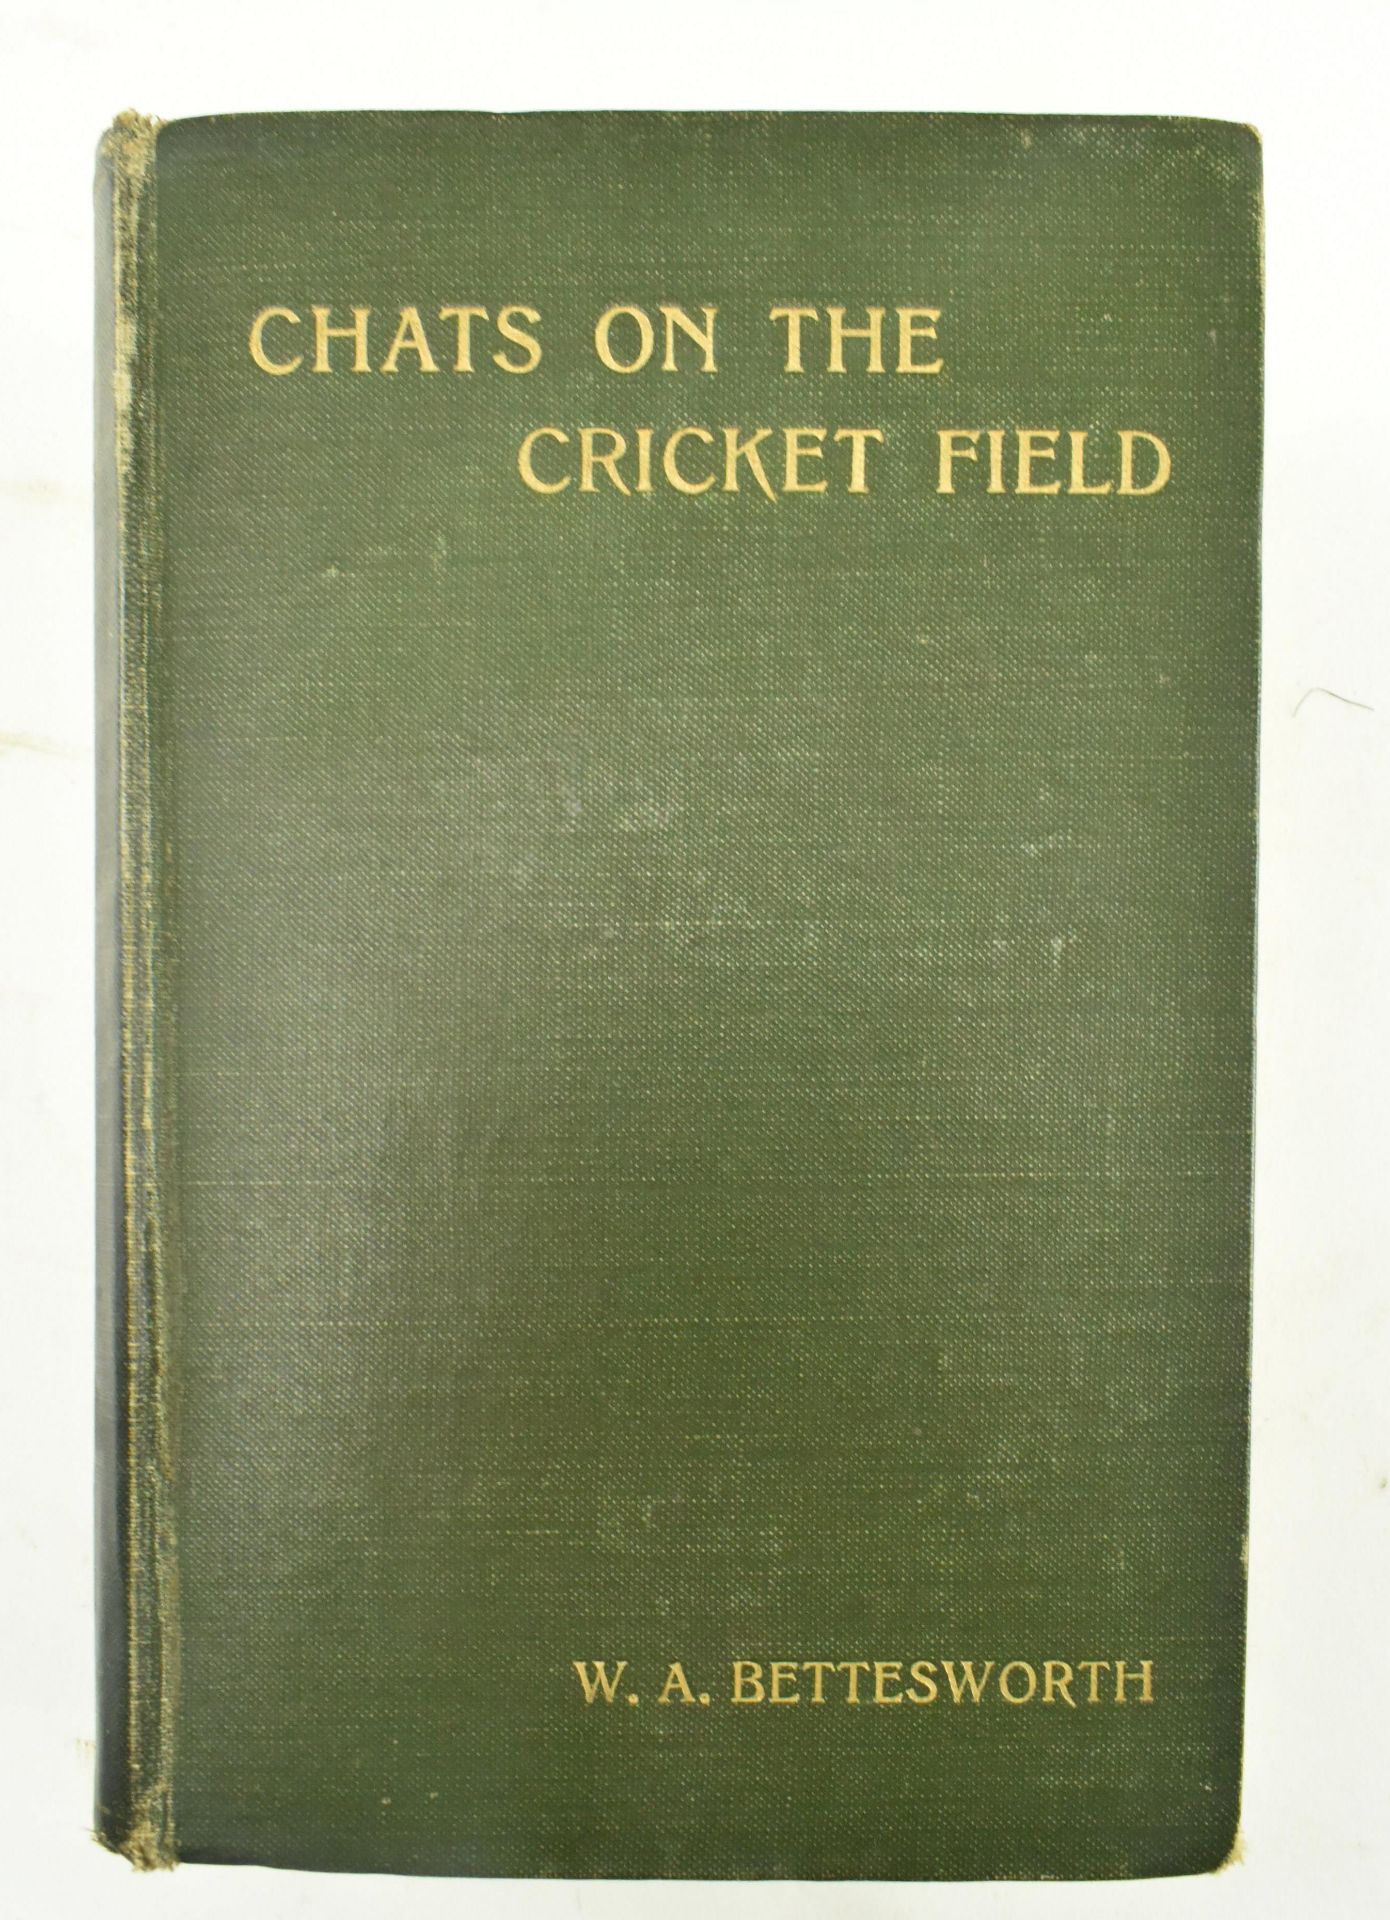 CRICKET INTEREST. COLLECTION OF TEN VICTORIAN BOOKS - Image 4 of 6